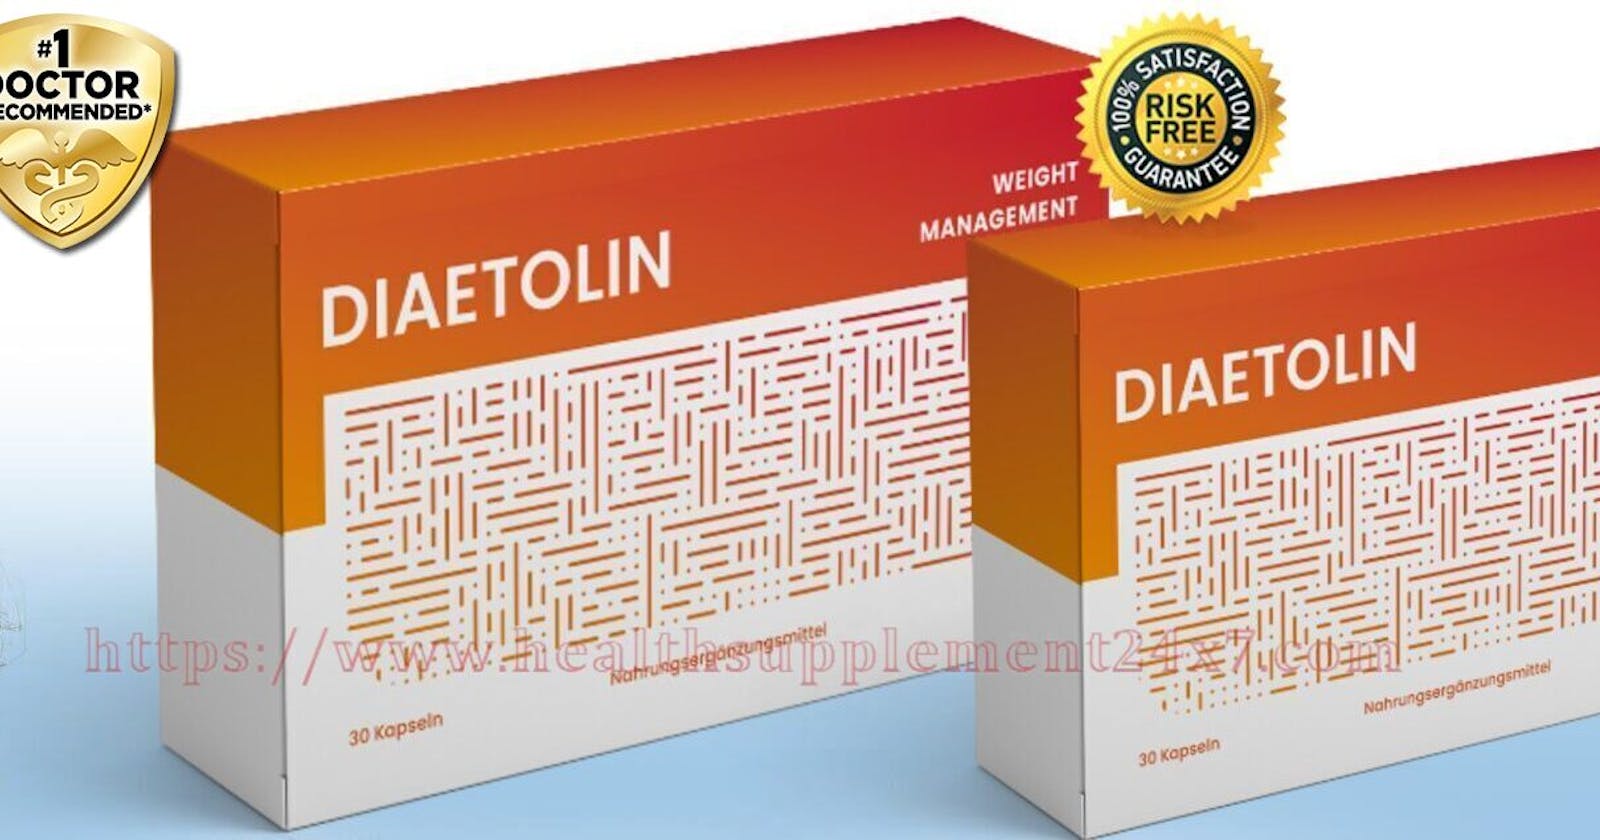 Diaetolin #1 Premium Weight Lose Reduce Appetite & Cravings For Instant Fat Burning {New Year Offer DE AT CH}(REAL OR HOAX)